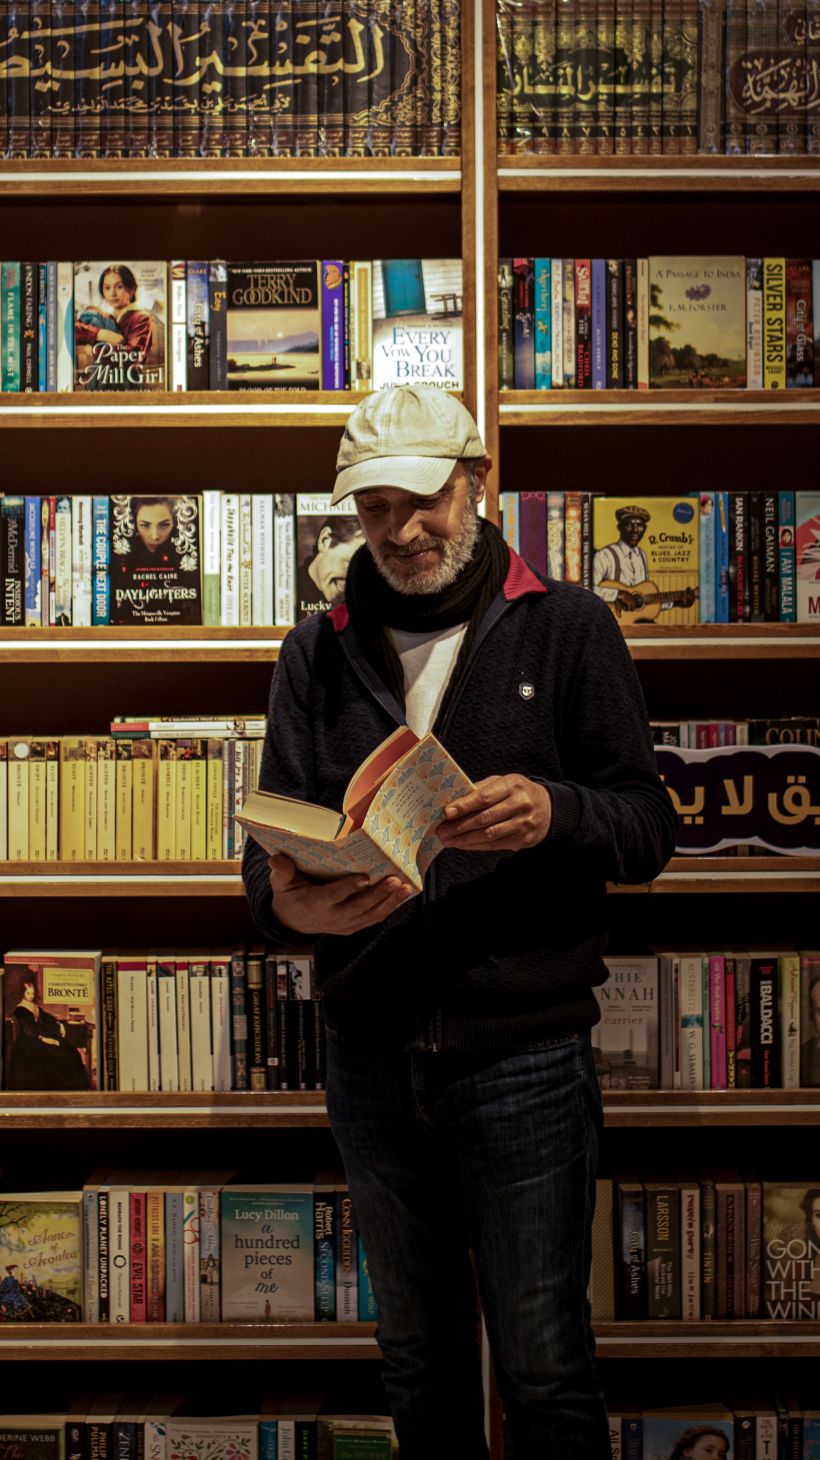 A man reads a book in front of a bookstore